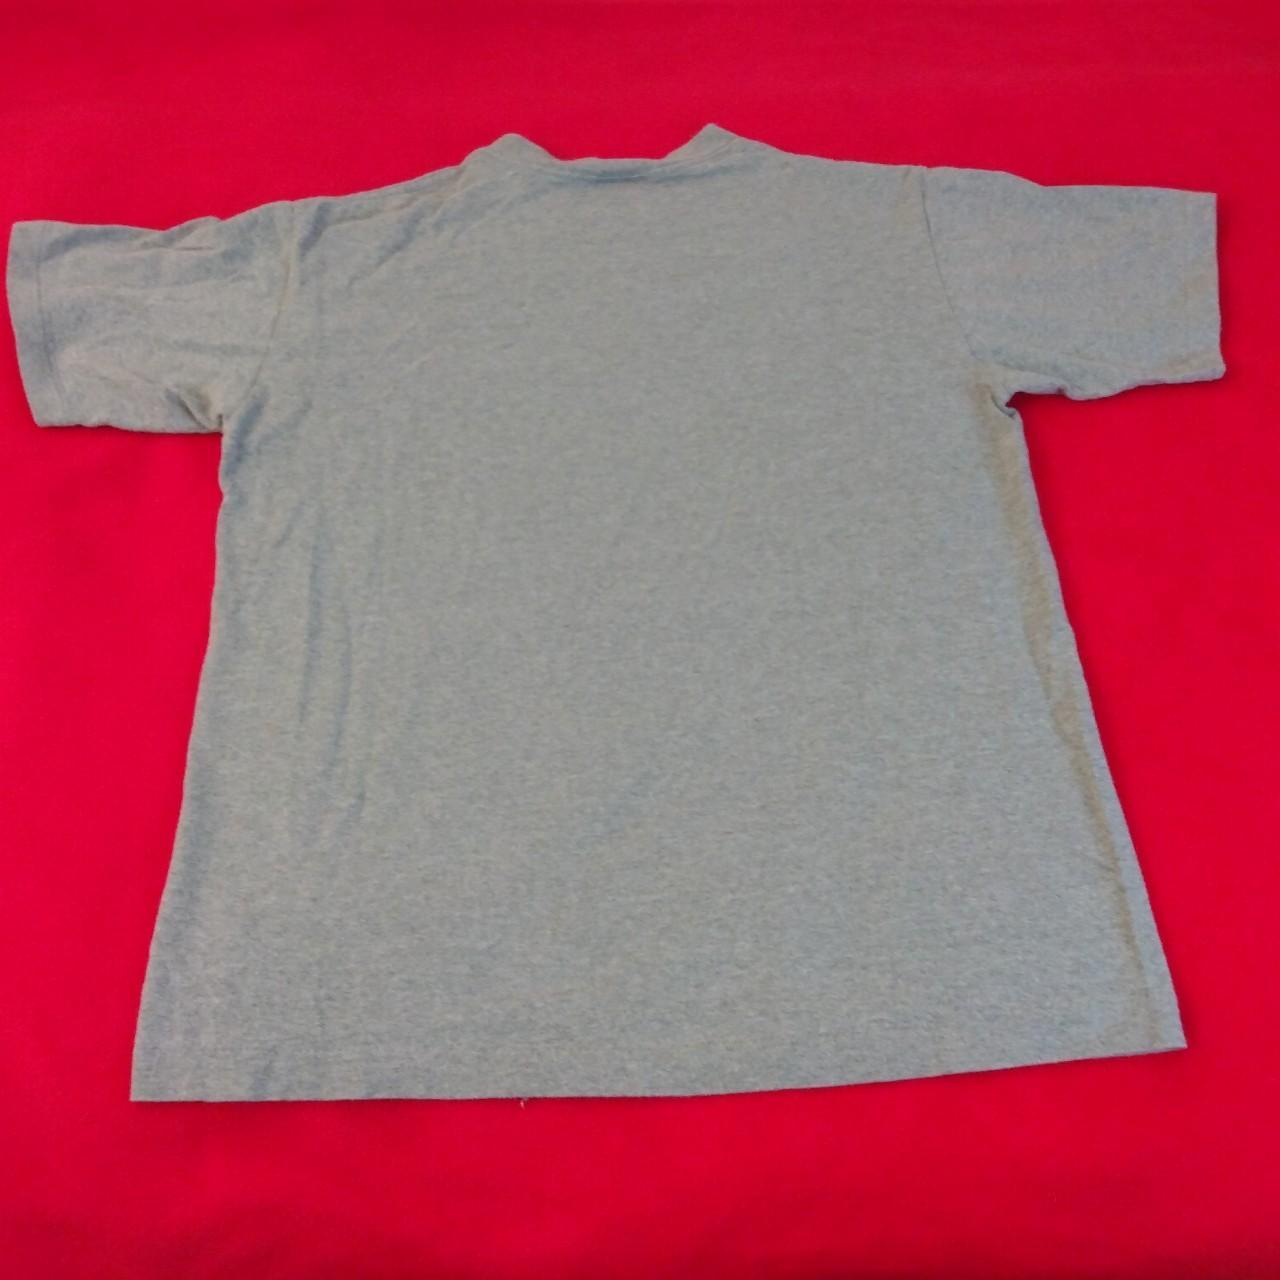 Fit for Me by Fruit of the Loom Men's Grey and Red T-shirt (4)